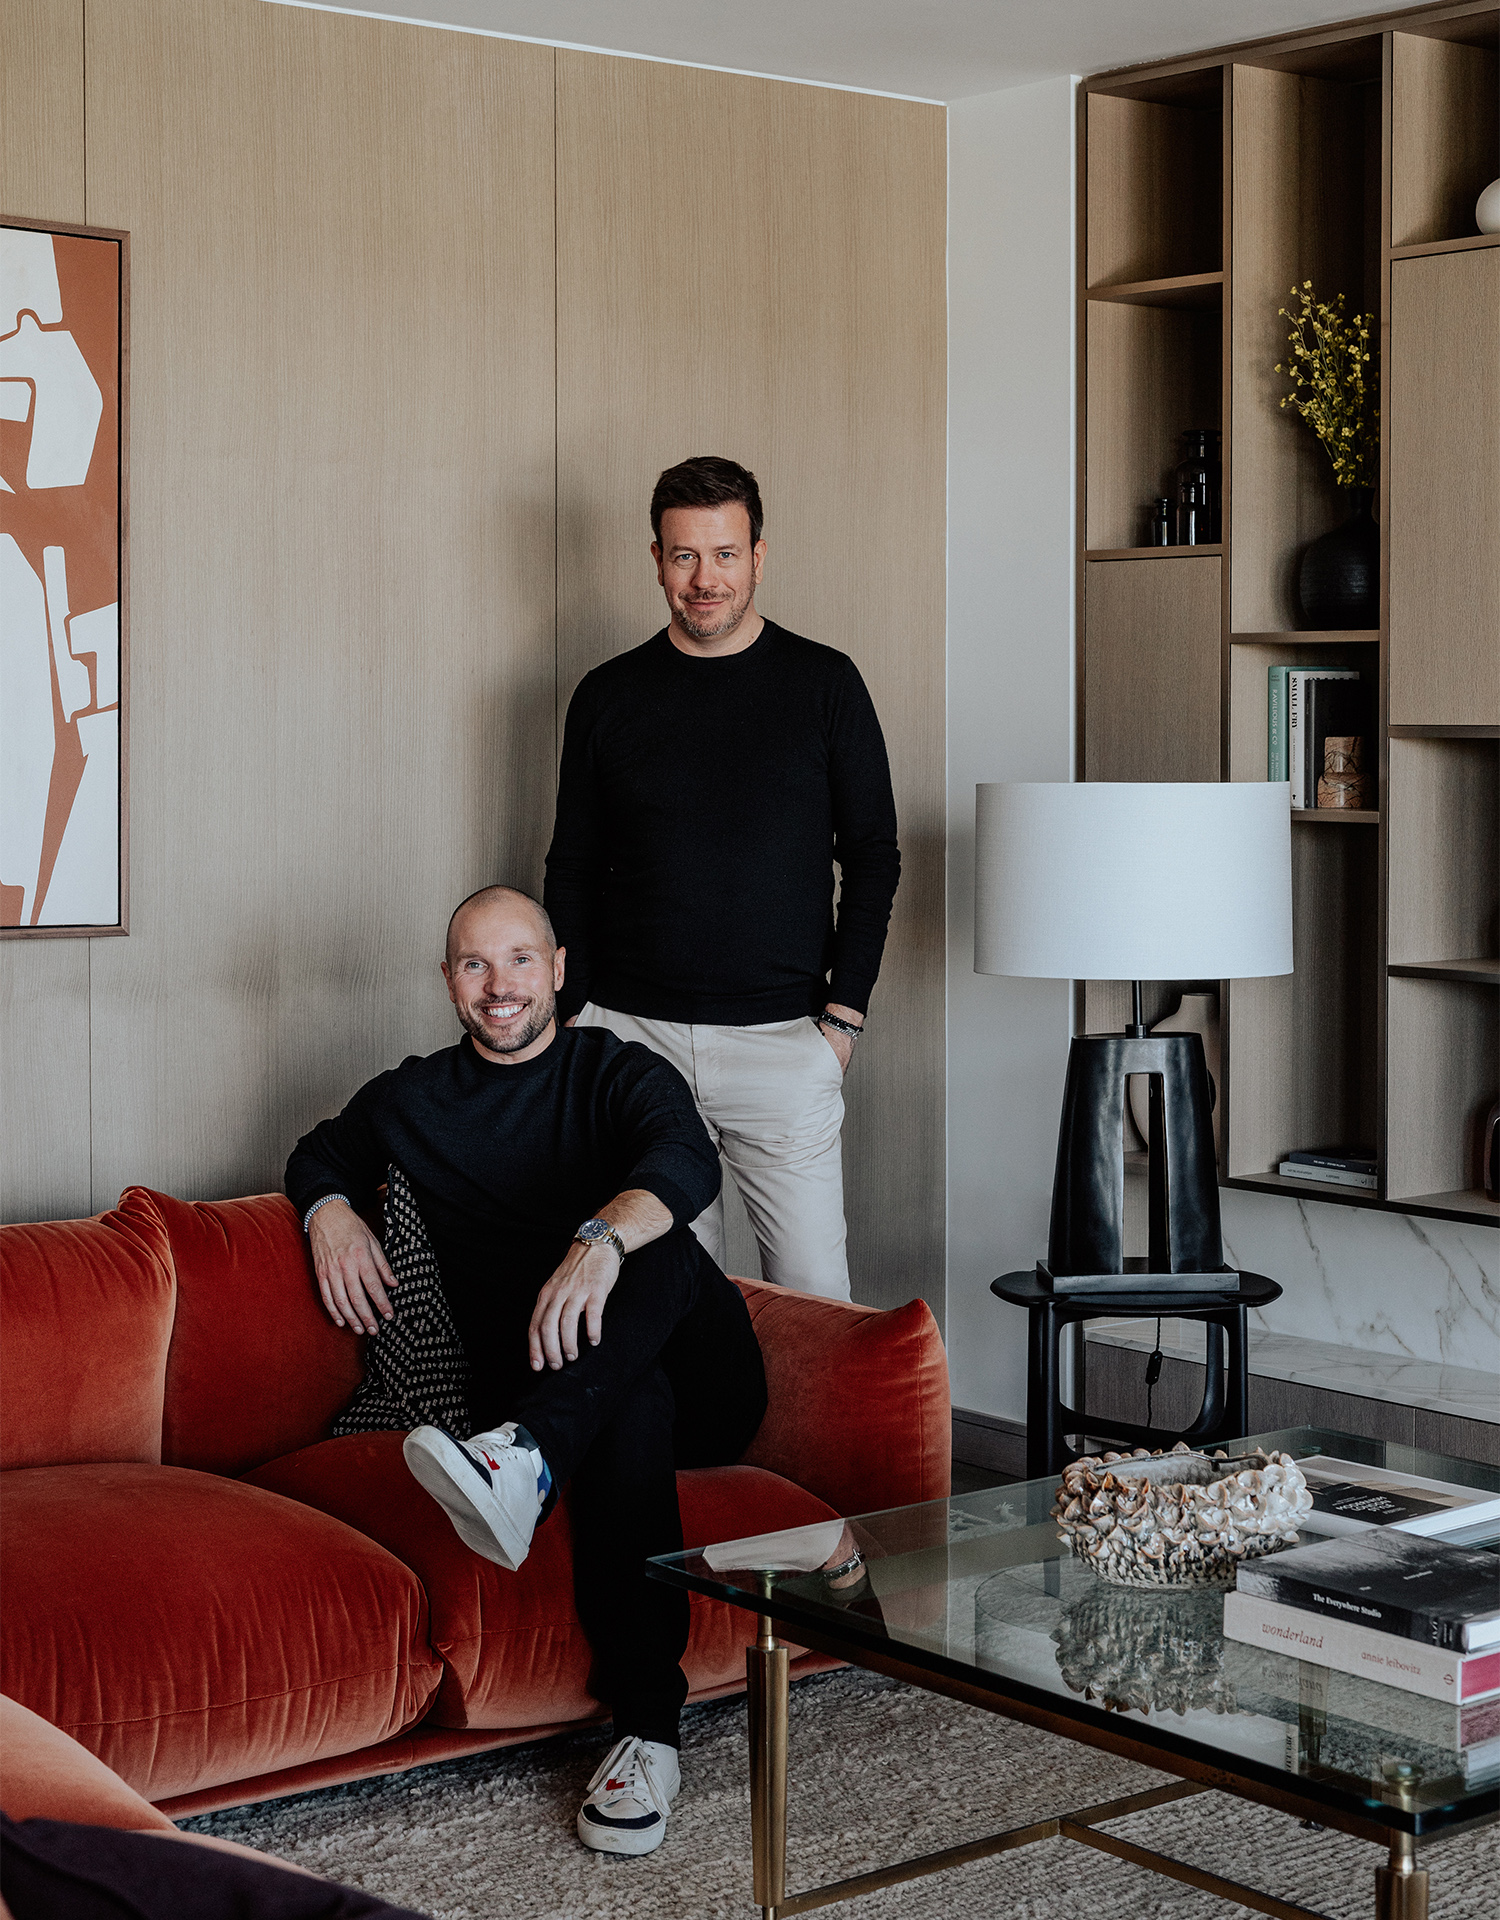 One St. John's Wood | Richard and Ed portrait in living area | Angel O'Donnell